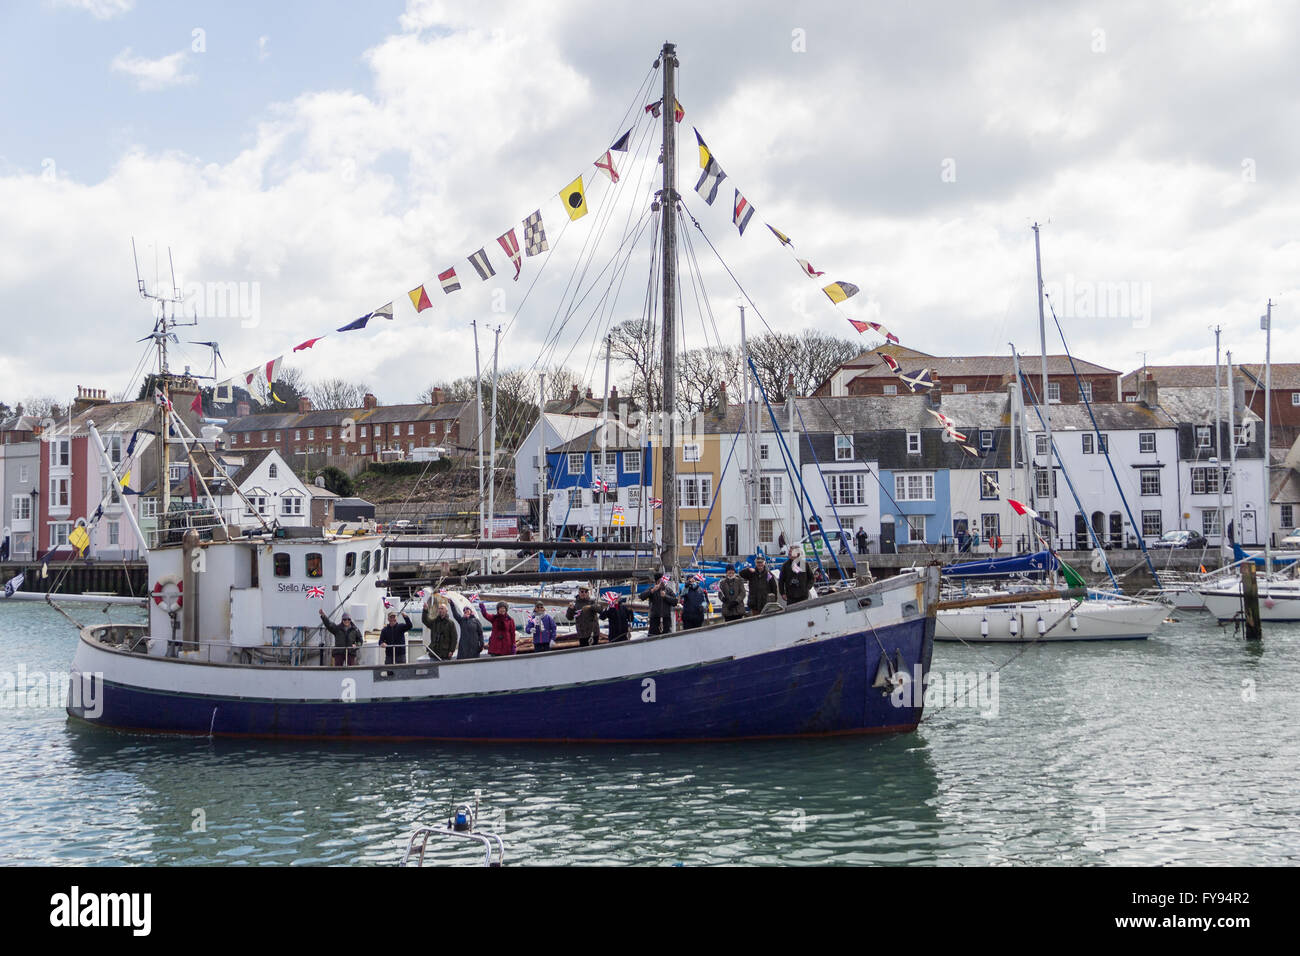 Weymouth, England. 23 April 2016. Queen's 90th Birthday Floating Tribute. Stella Ann Fishing boat. Credit:  Frances Underwood/Alamy Live News Stock Photo